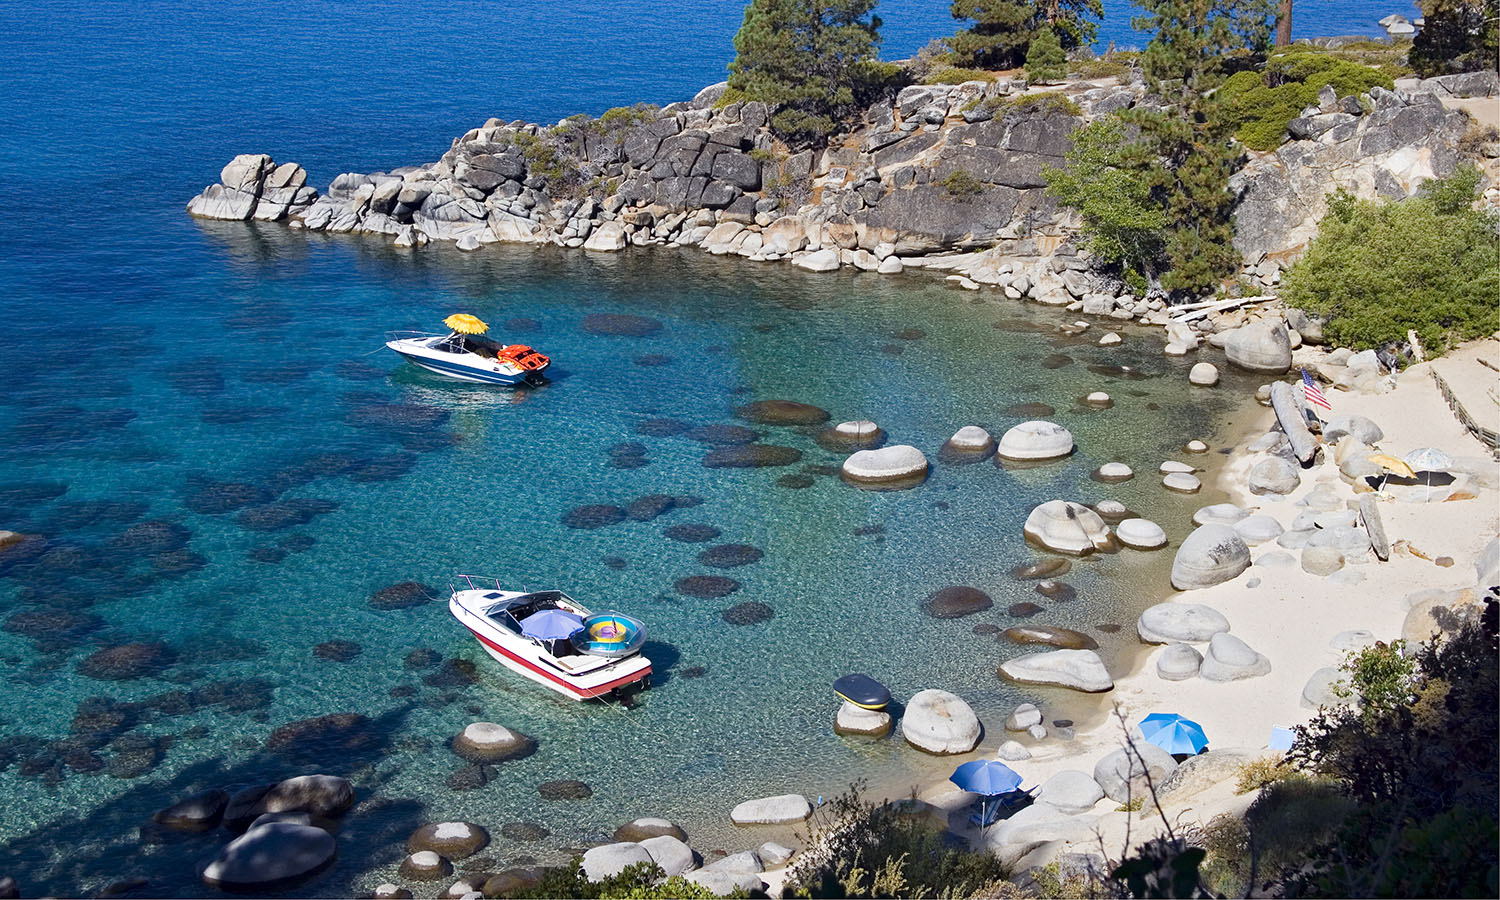 With idyllic coves like this you'd expect throngs of visitors. 